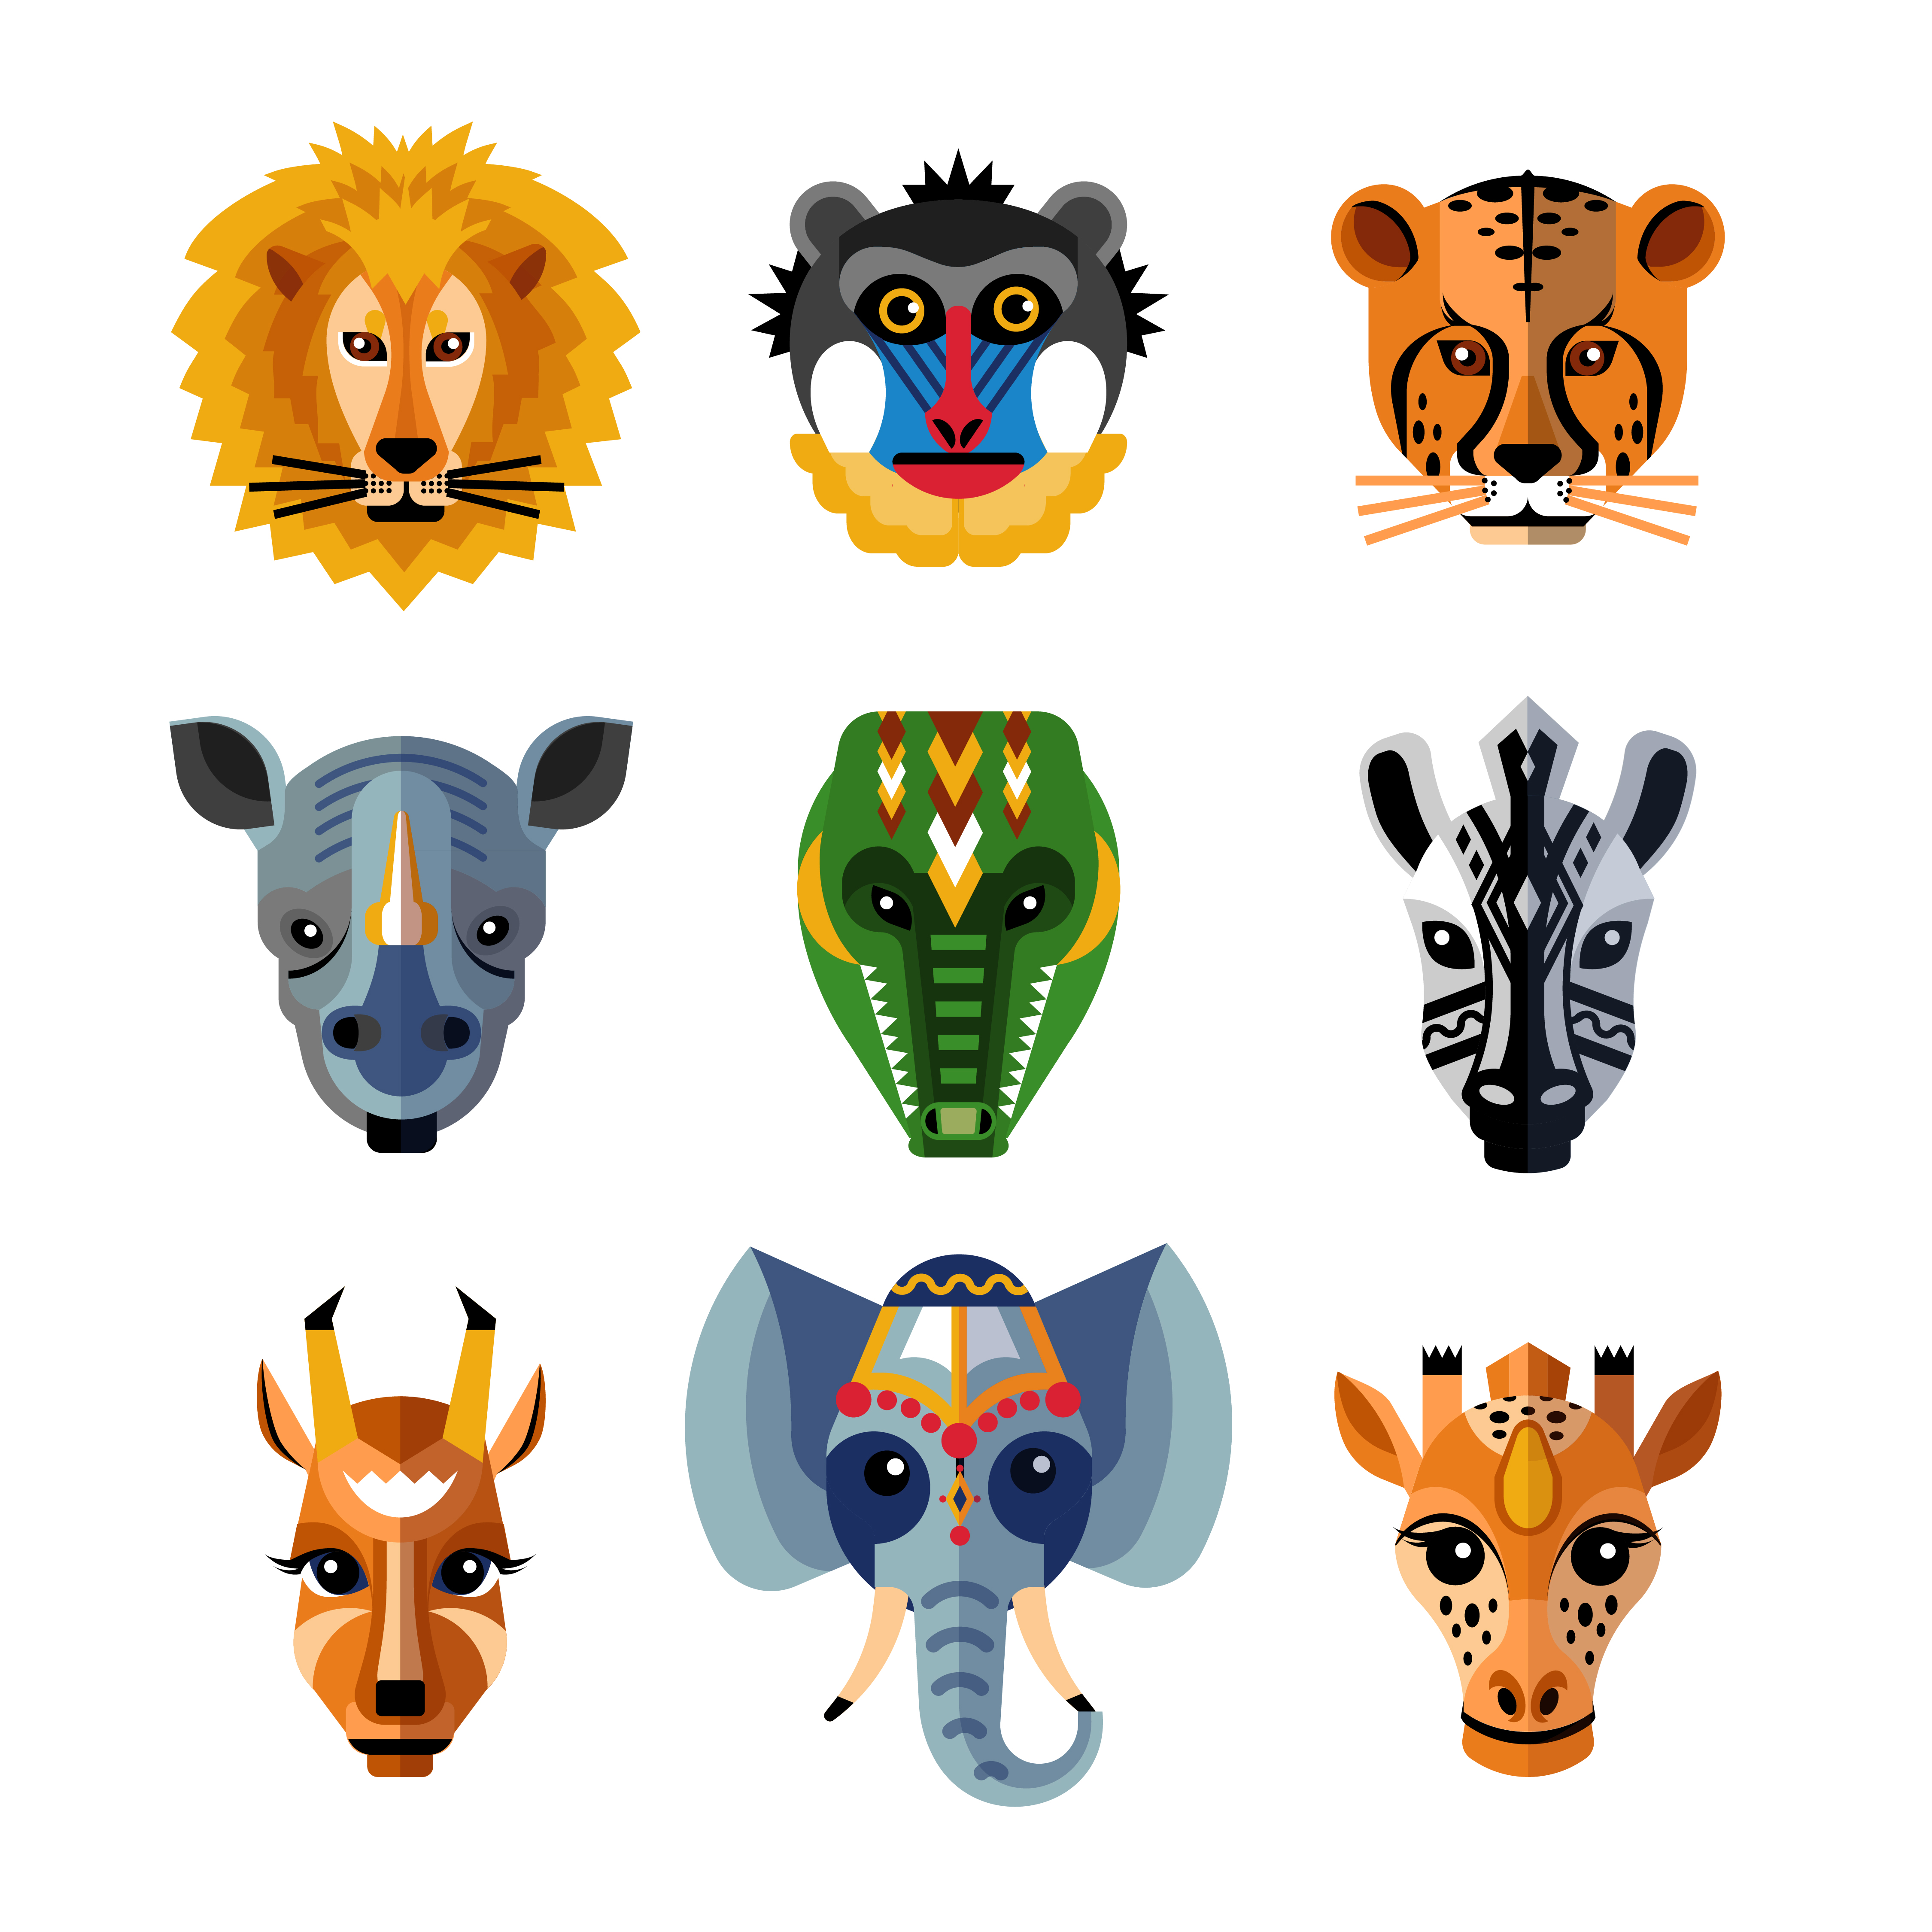 https://static.vecteezy.com/system/resources/previews/000/467/381/original/african-animals-heads-masks-flat-icons-vector.jpg